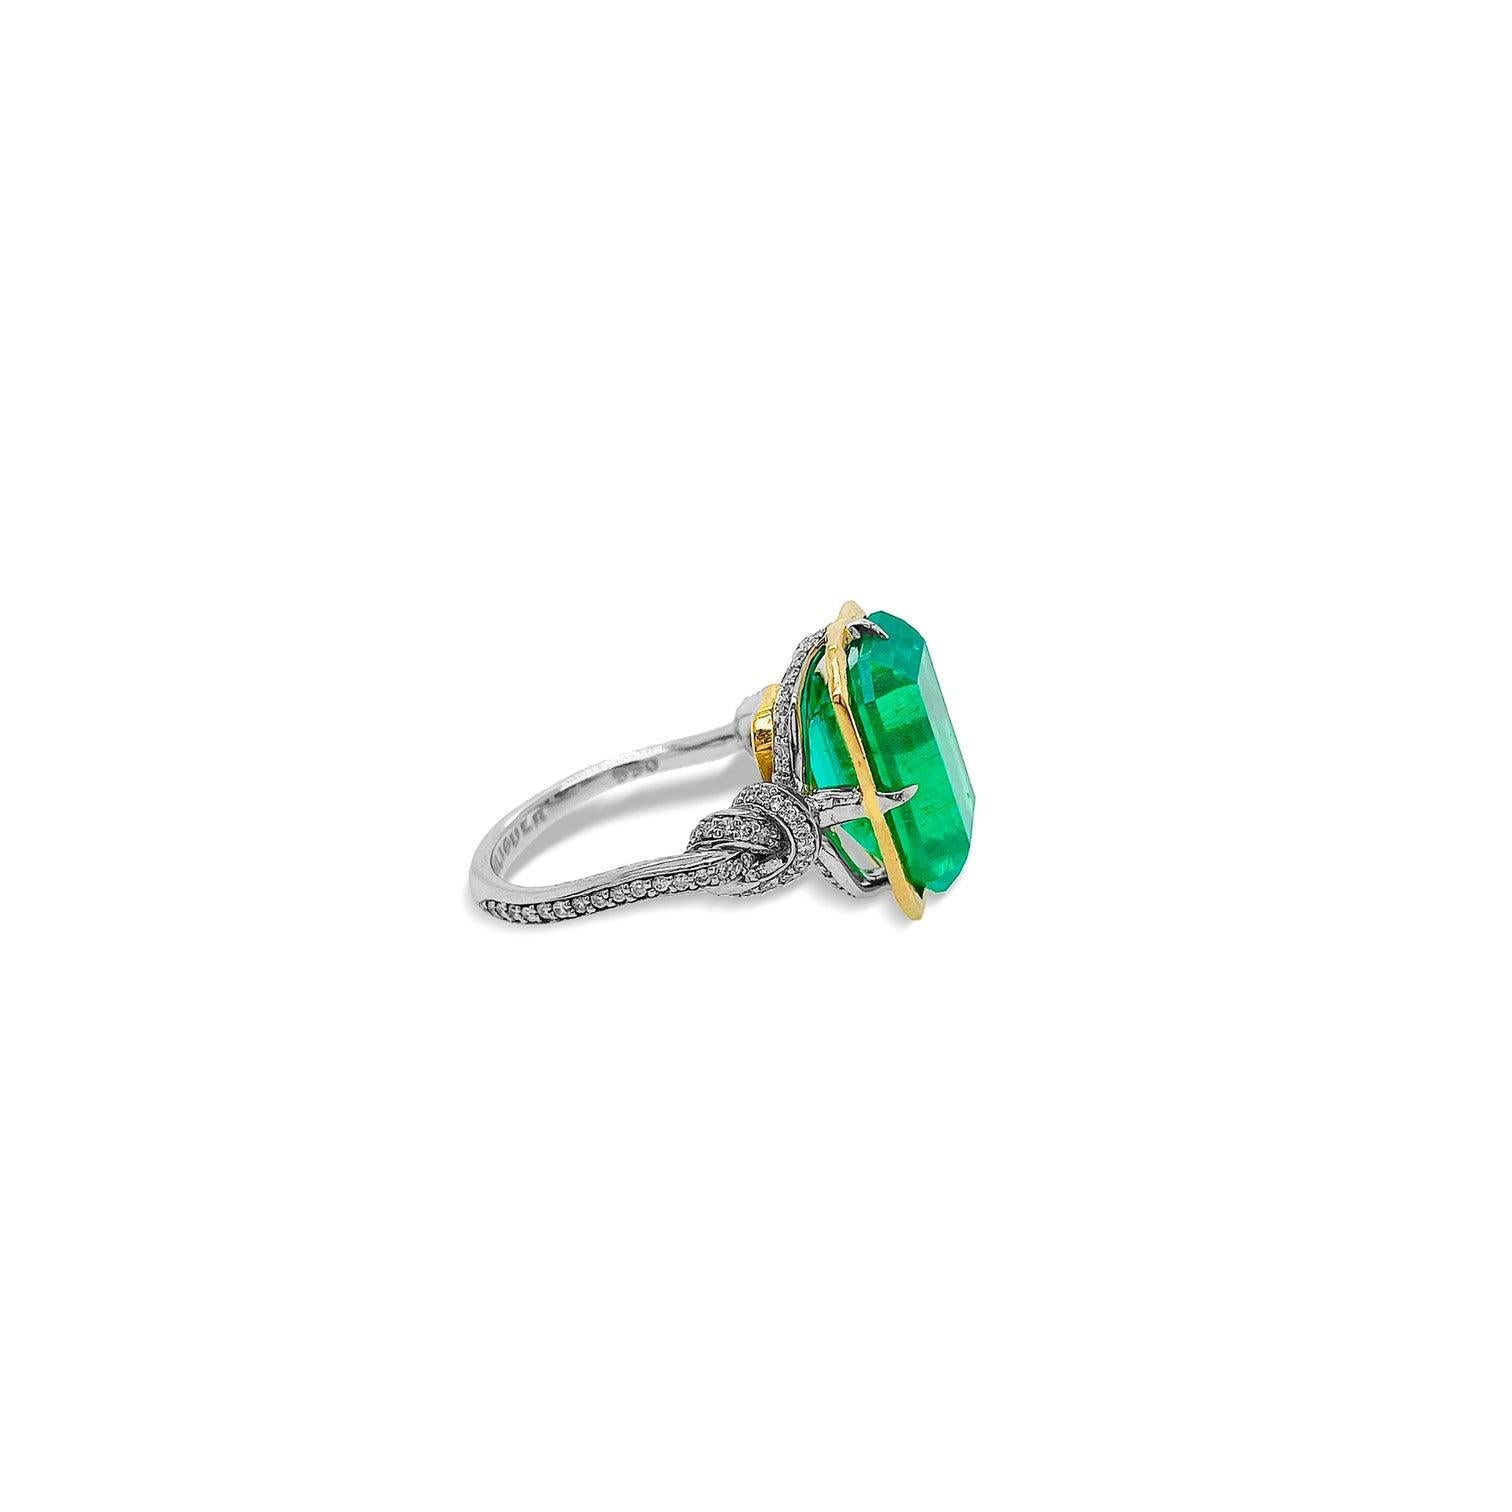 5.79ct Zambian Emerald in Forget Me Knot Style Ring 8